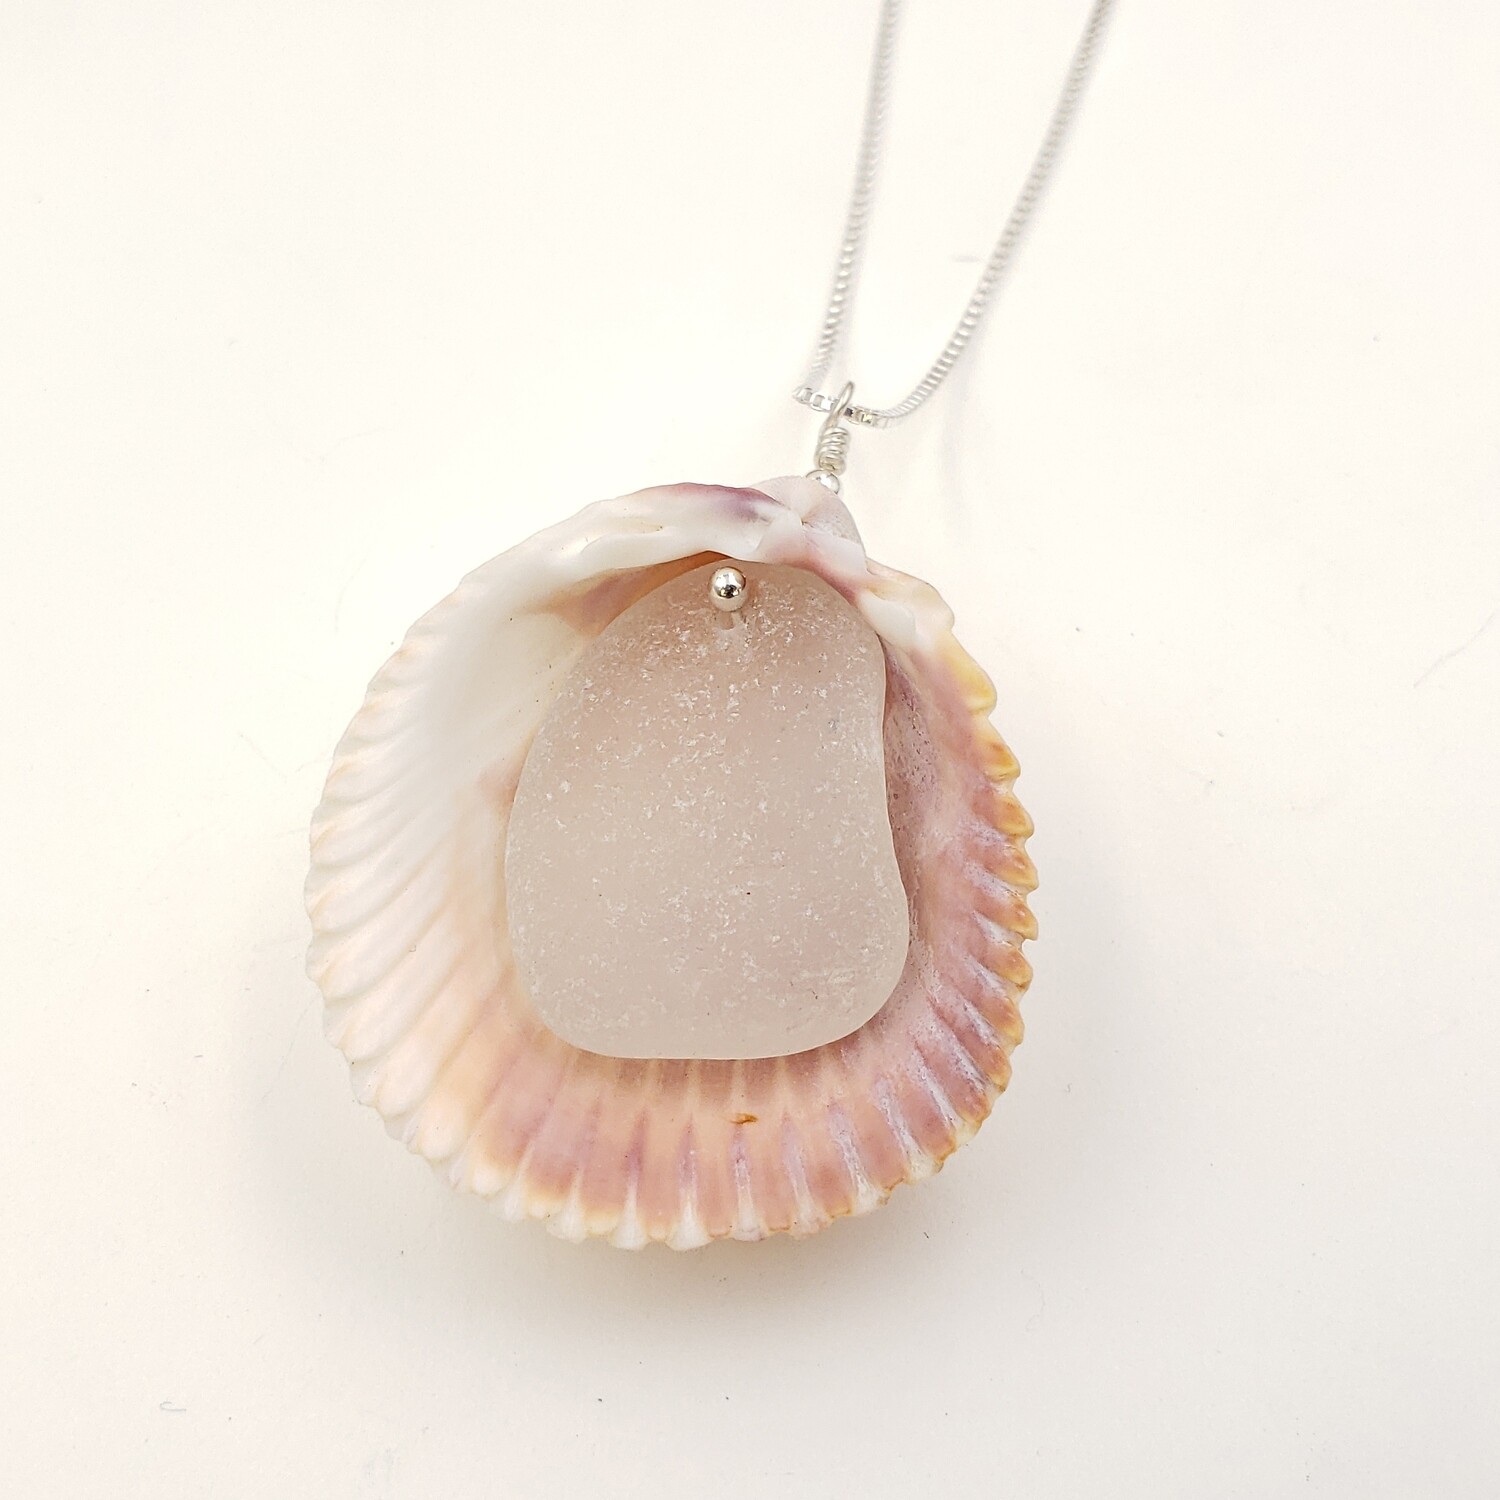 Cockle Shell Necklace with White Lake Erie Beach Glass